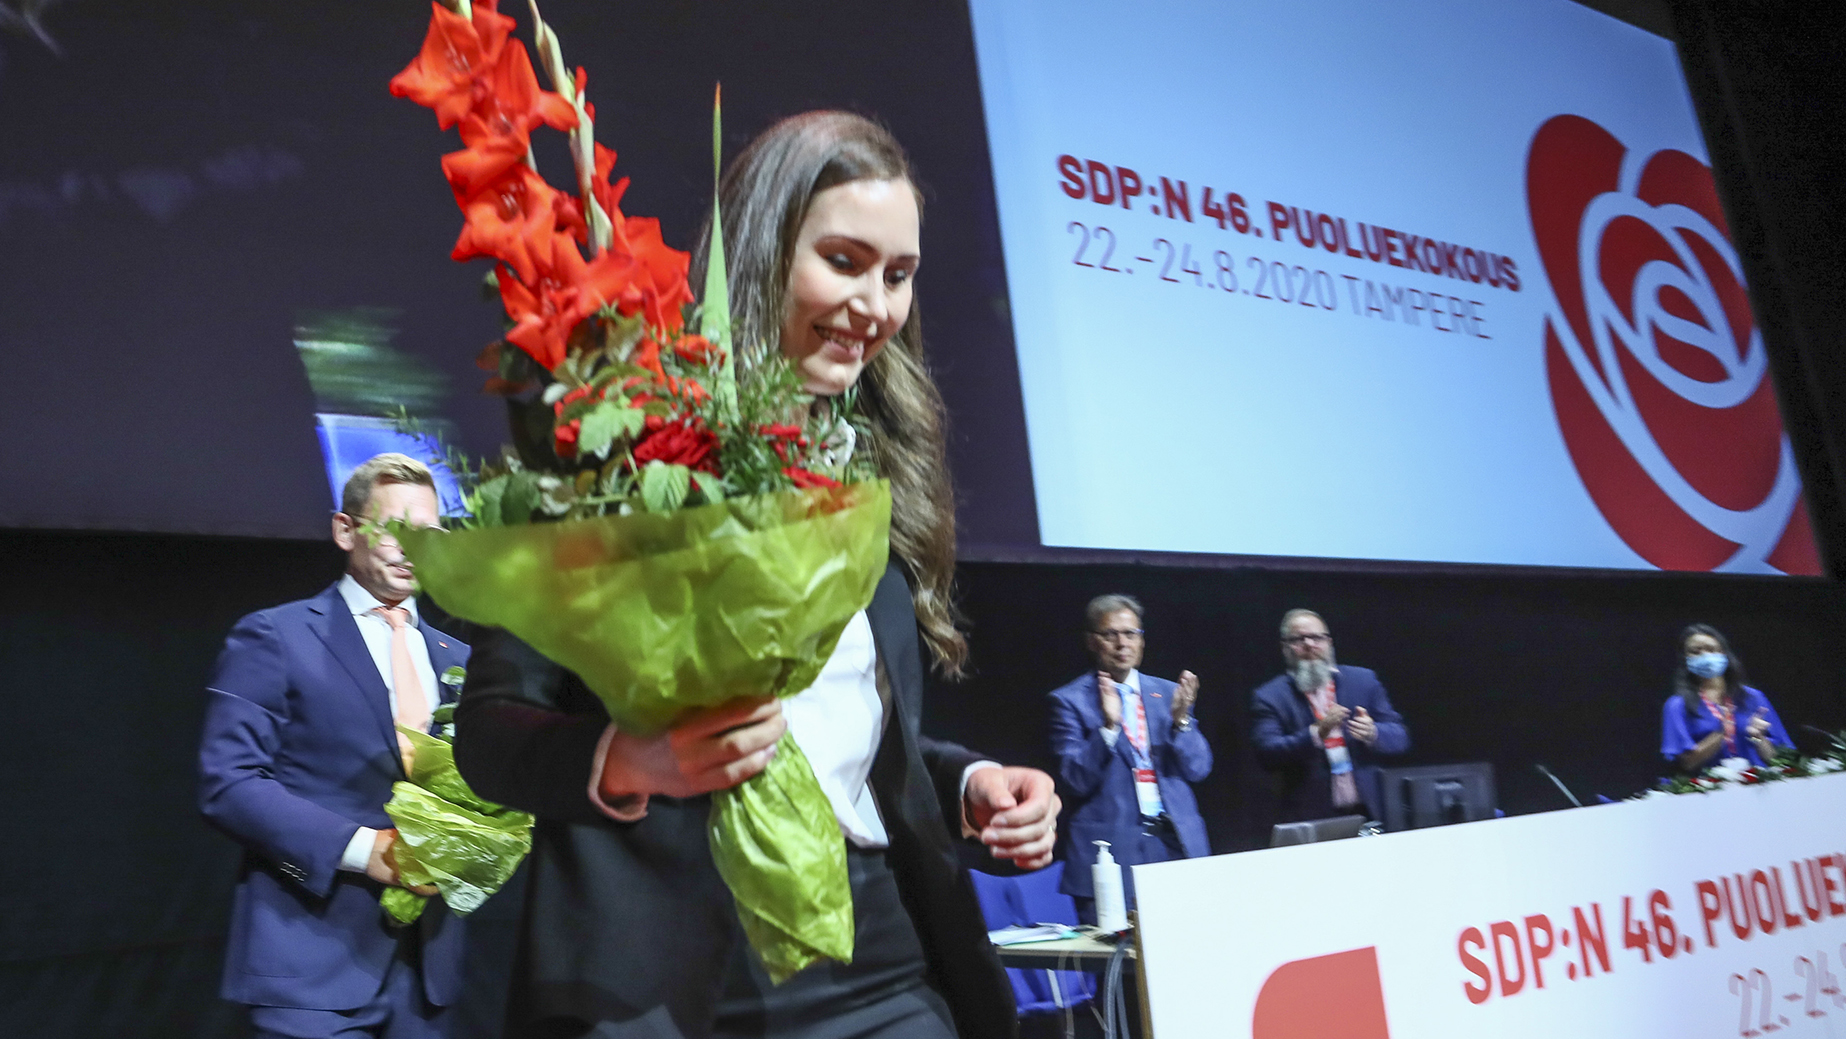 Marin will take over as chairman of the SDP, promising to focus on jobs and education